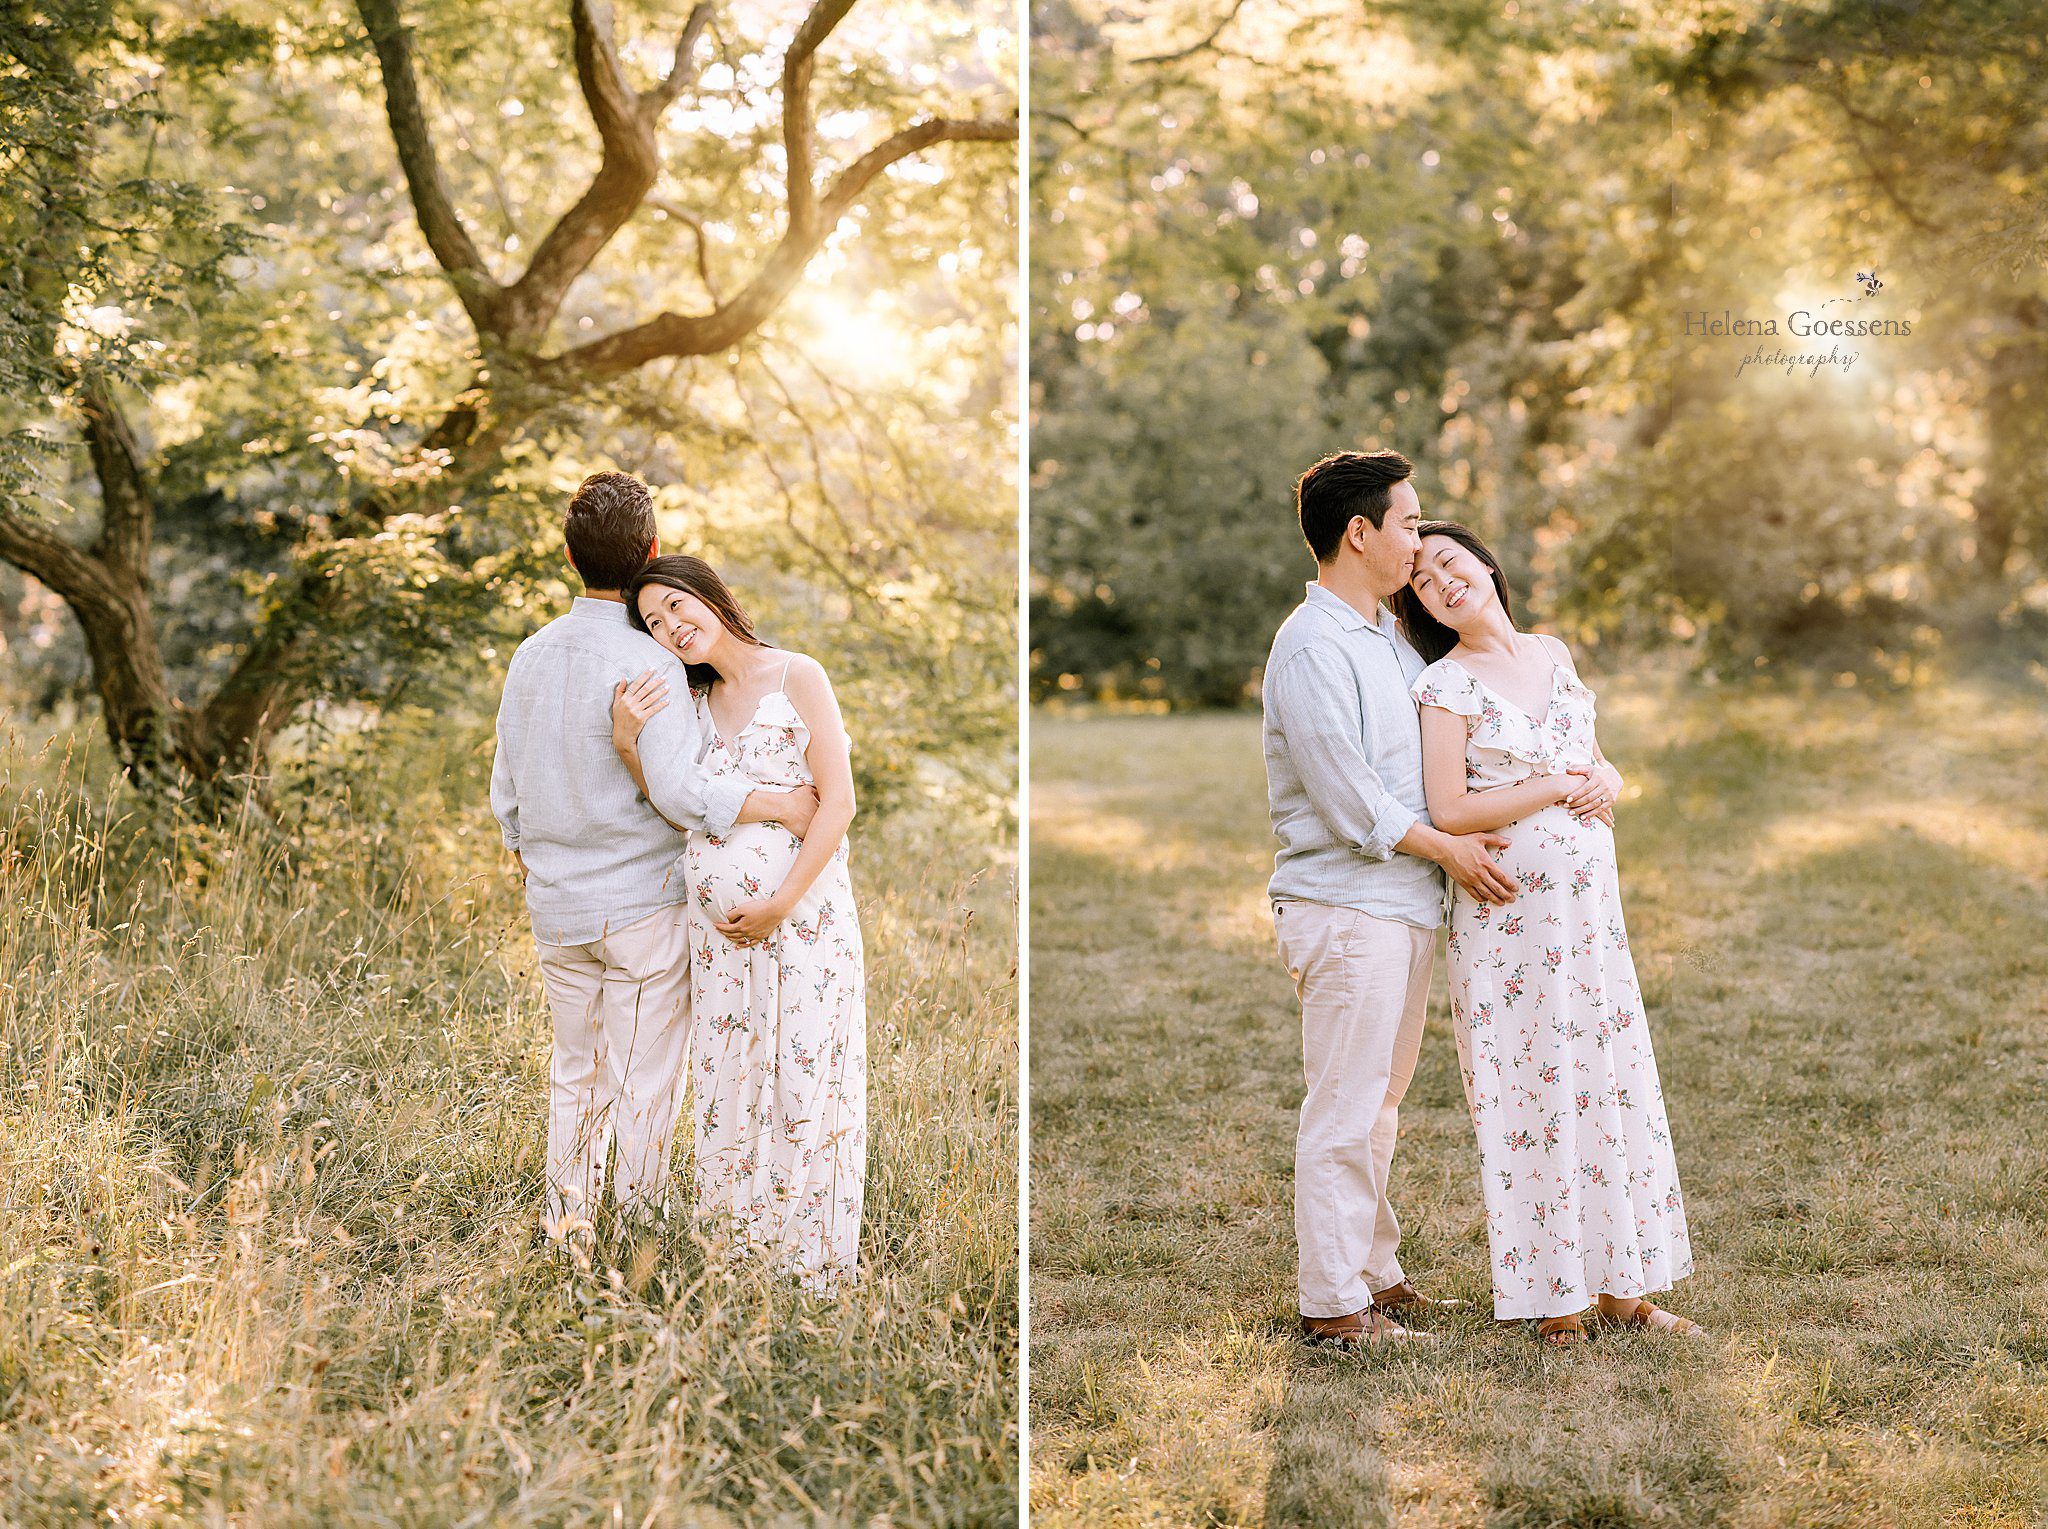 summer maternity portraits in Boston MA with Helena Goessens Photography